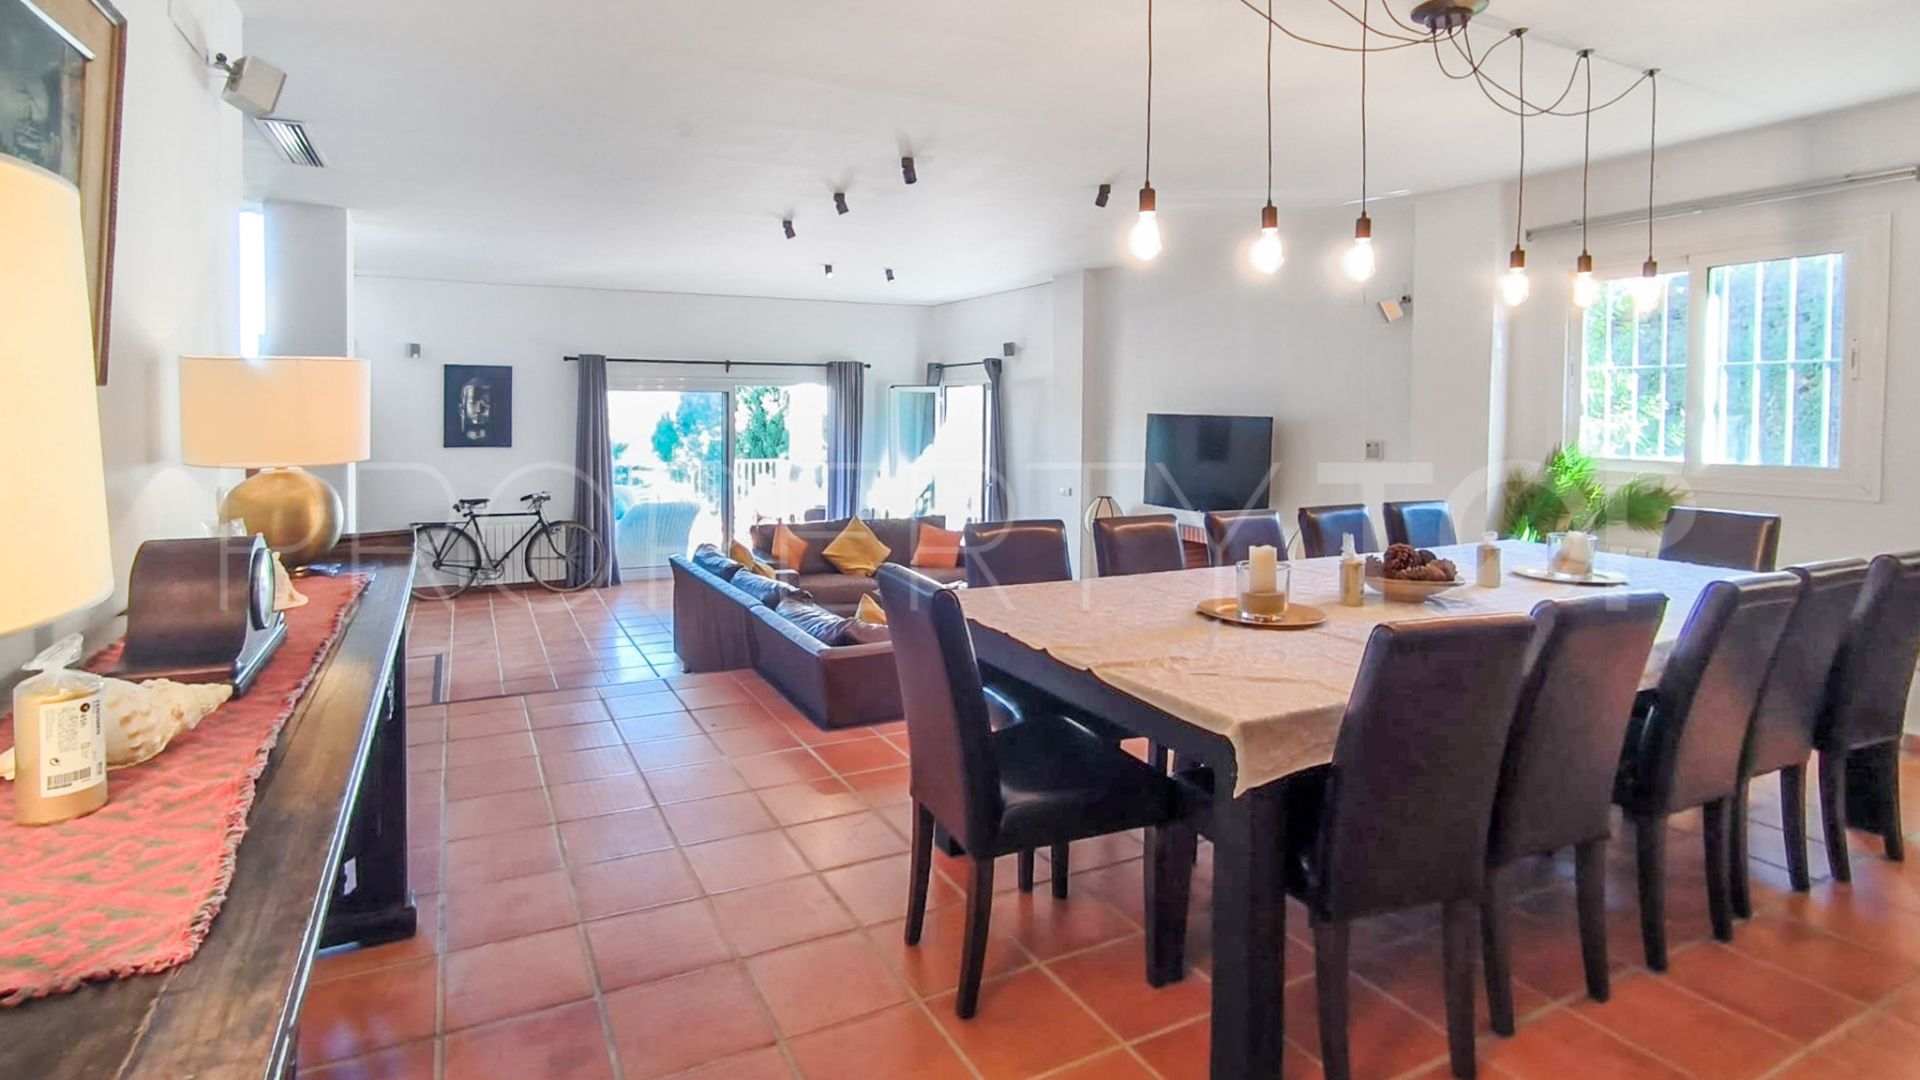 For sale villa in Sotogrande with 5 bedrooms